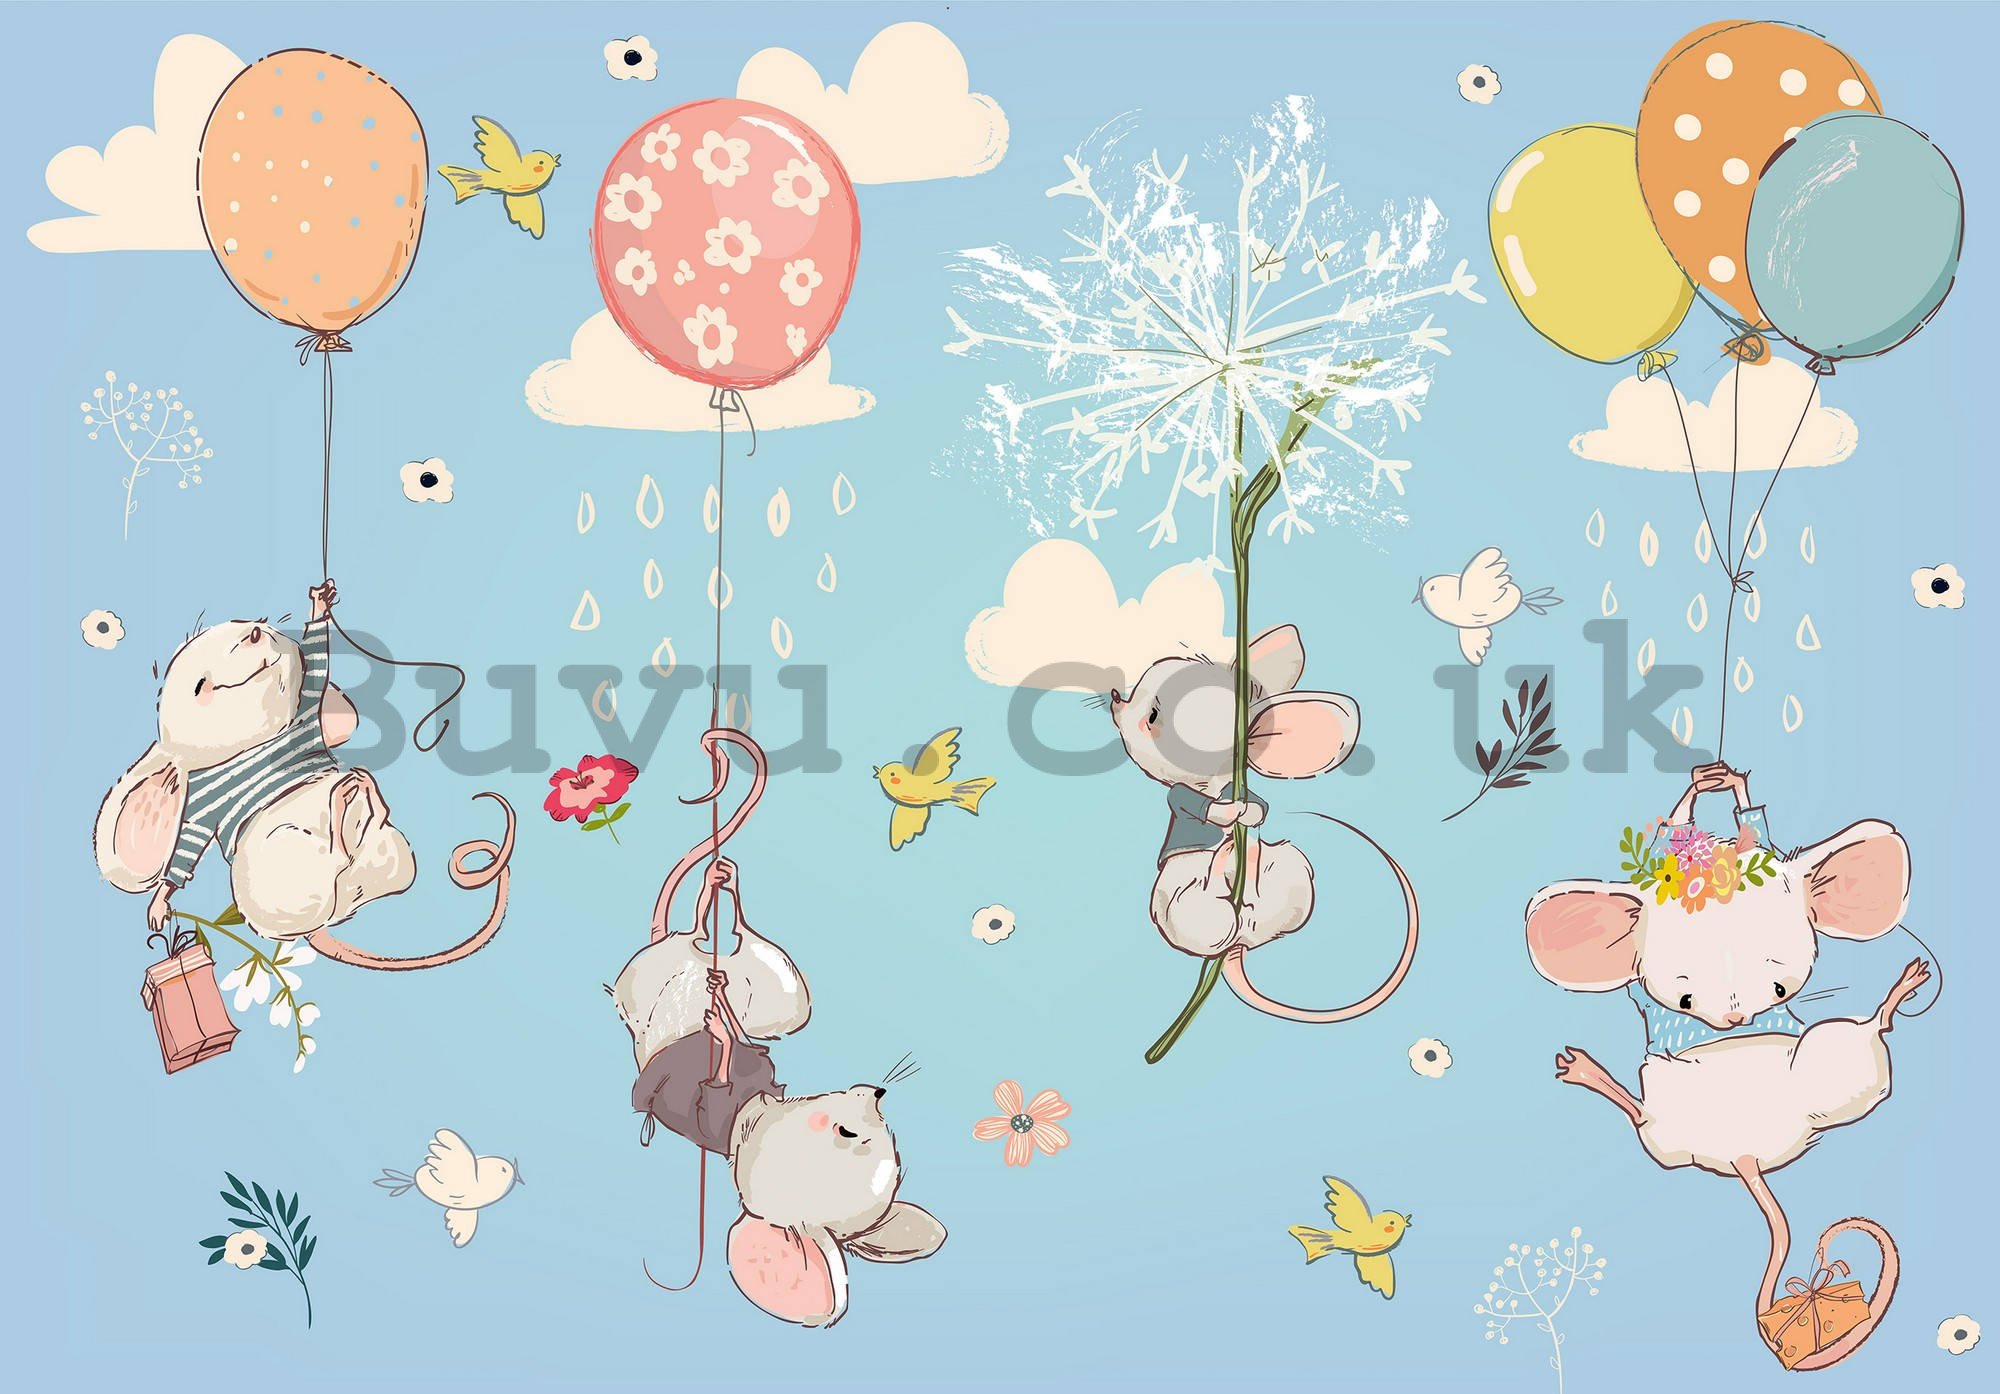 Wall mural vlies: Little mice in the clouds - 104x70,5 cm